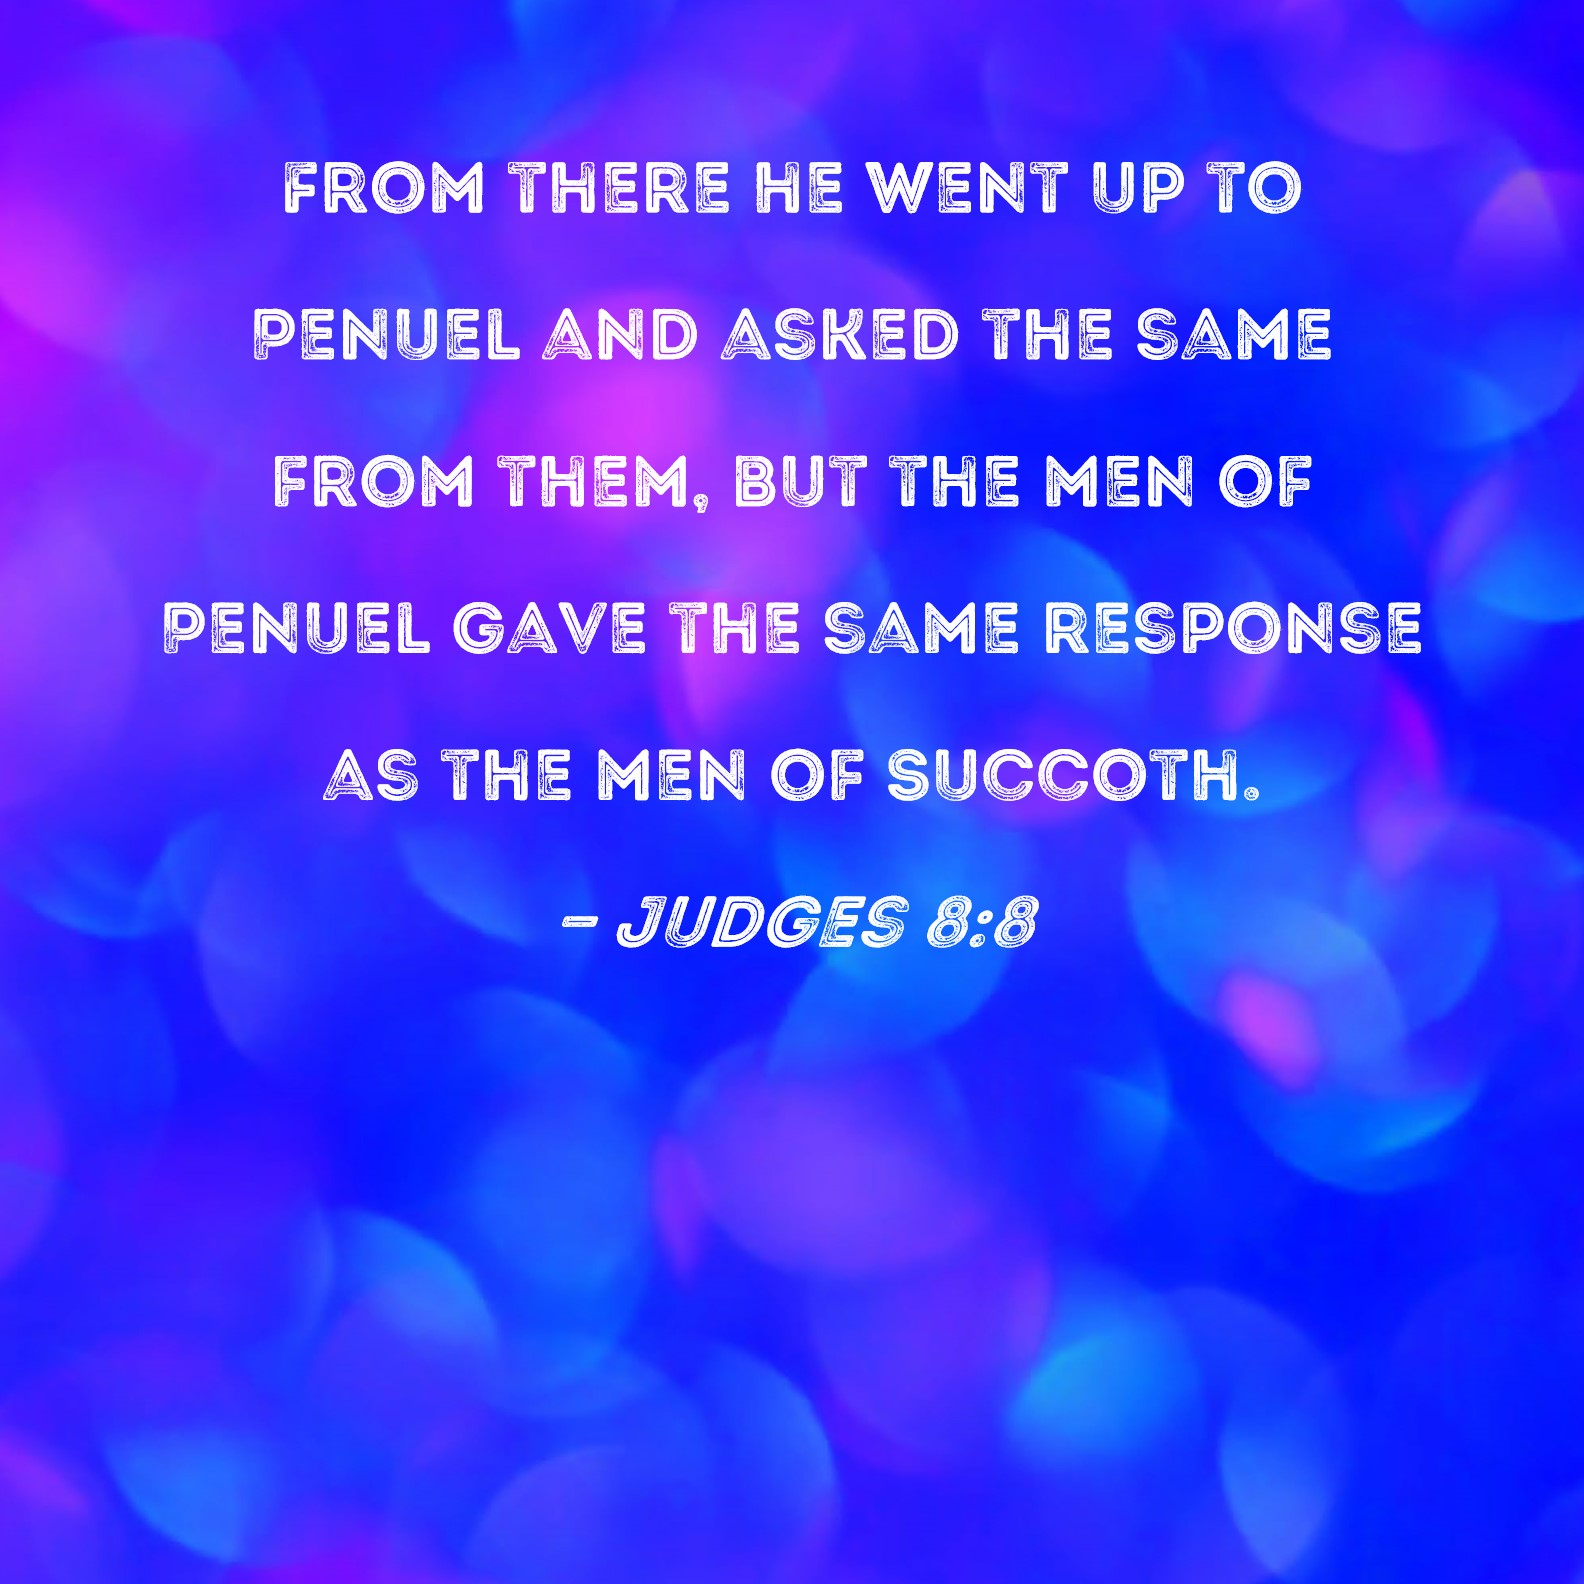 Judges 8:8 From there he went up to Penuel and asked the same from 